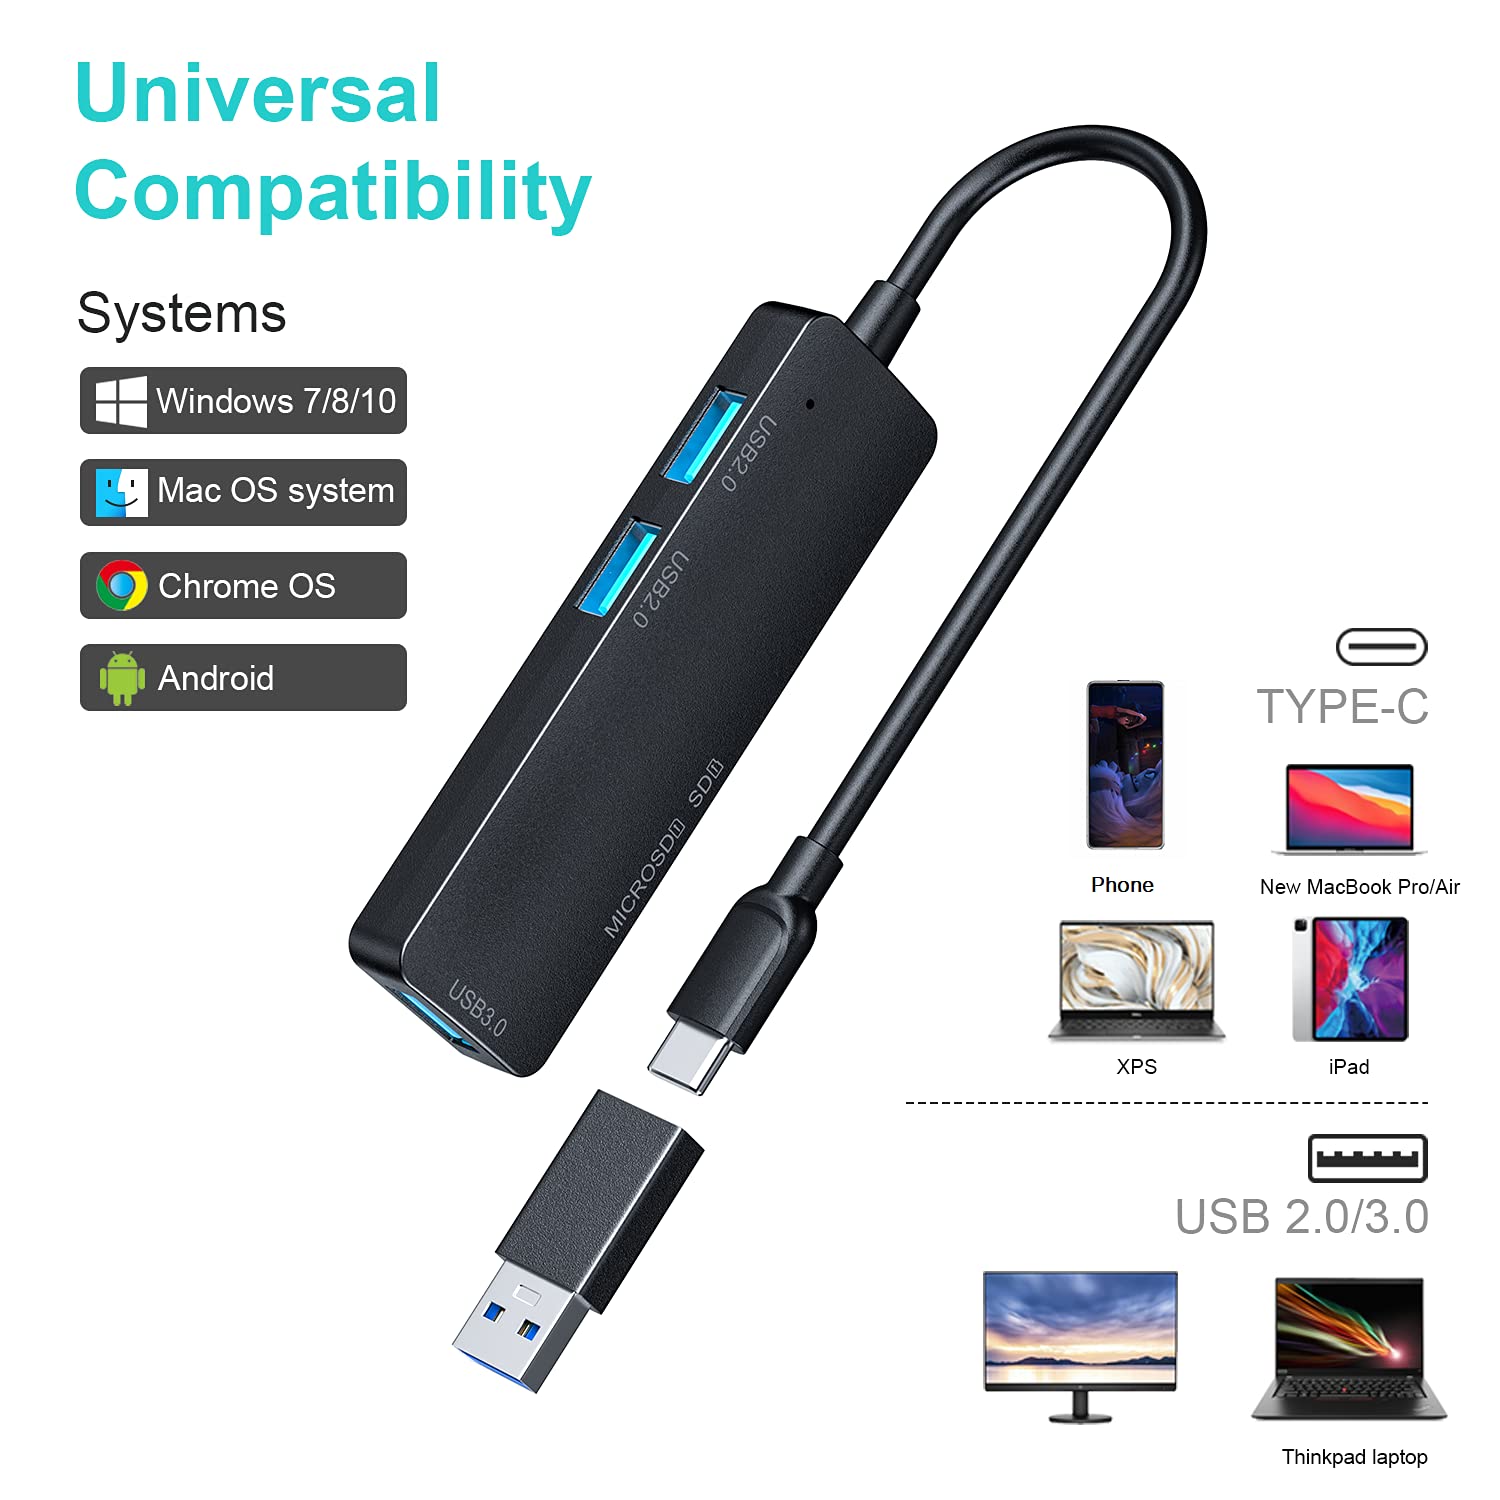 USB C Hub 5 in 1 USB C to 3.0 Splitter with 1 USB 3.0 Port, 2 USB 2.0 Port,SD/TF Card Reader, and USB A 3.0 Adapter Compatible for USB C Phones,MacBook Pro, Chromebook, ipad, XPS, andUSB Adevices